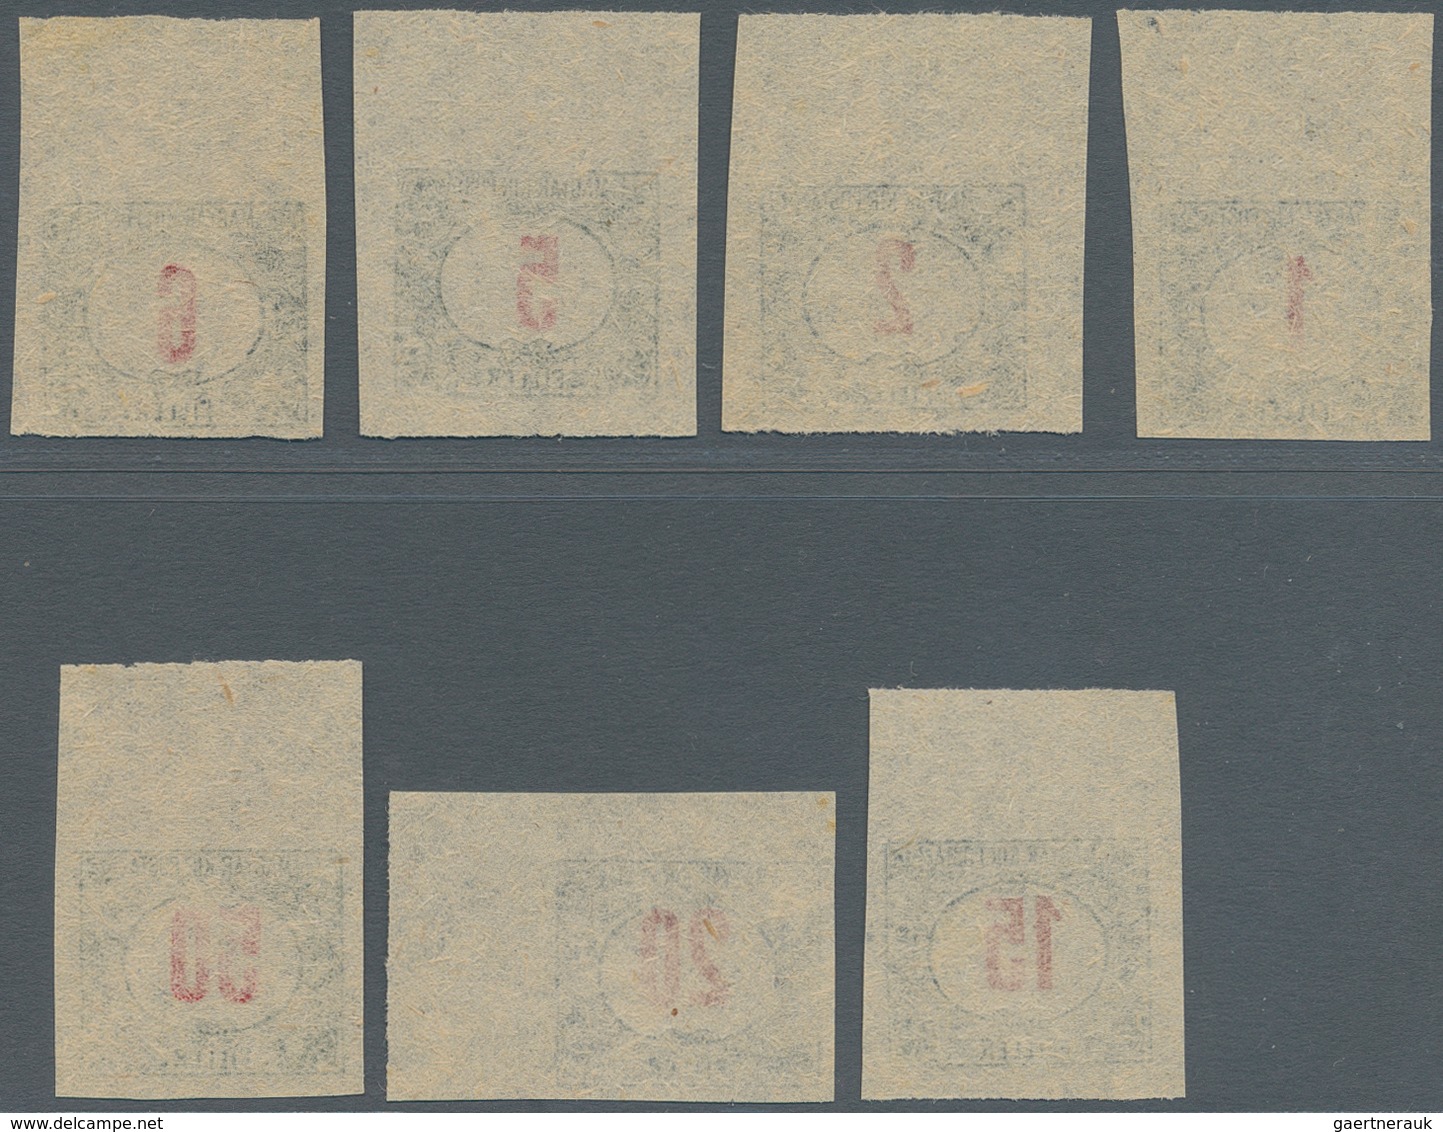 Ungarn - Portomarken: 1915/1919. Postage Due Stamps, Red/green, 7 Values , Imperforated Proofs On Th - Postage Due